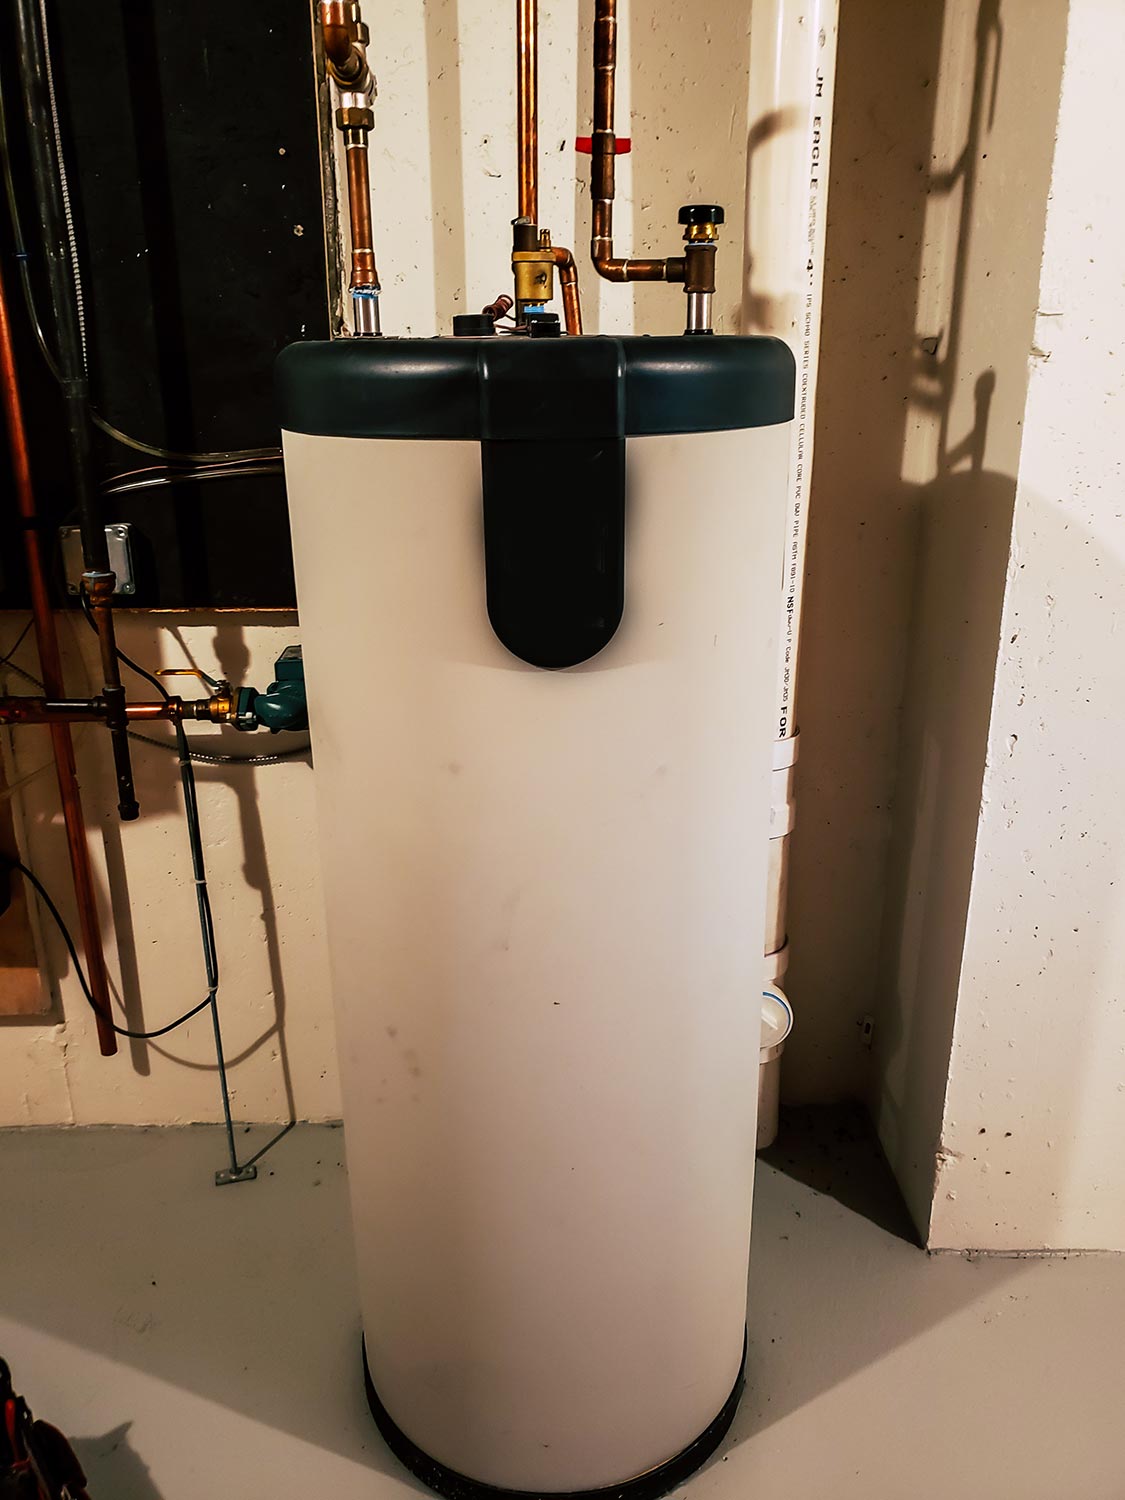 40 gallon water heater storage tank in the basement of a residential home